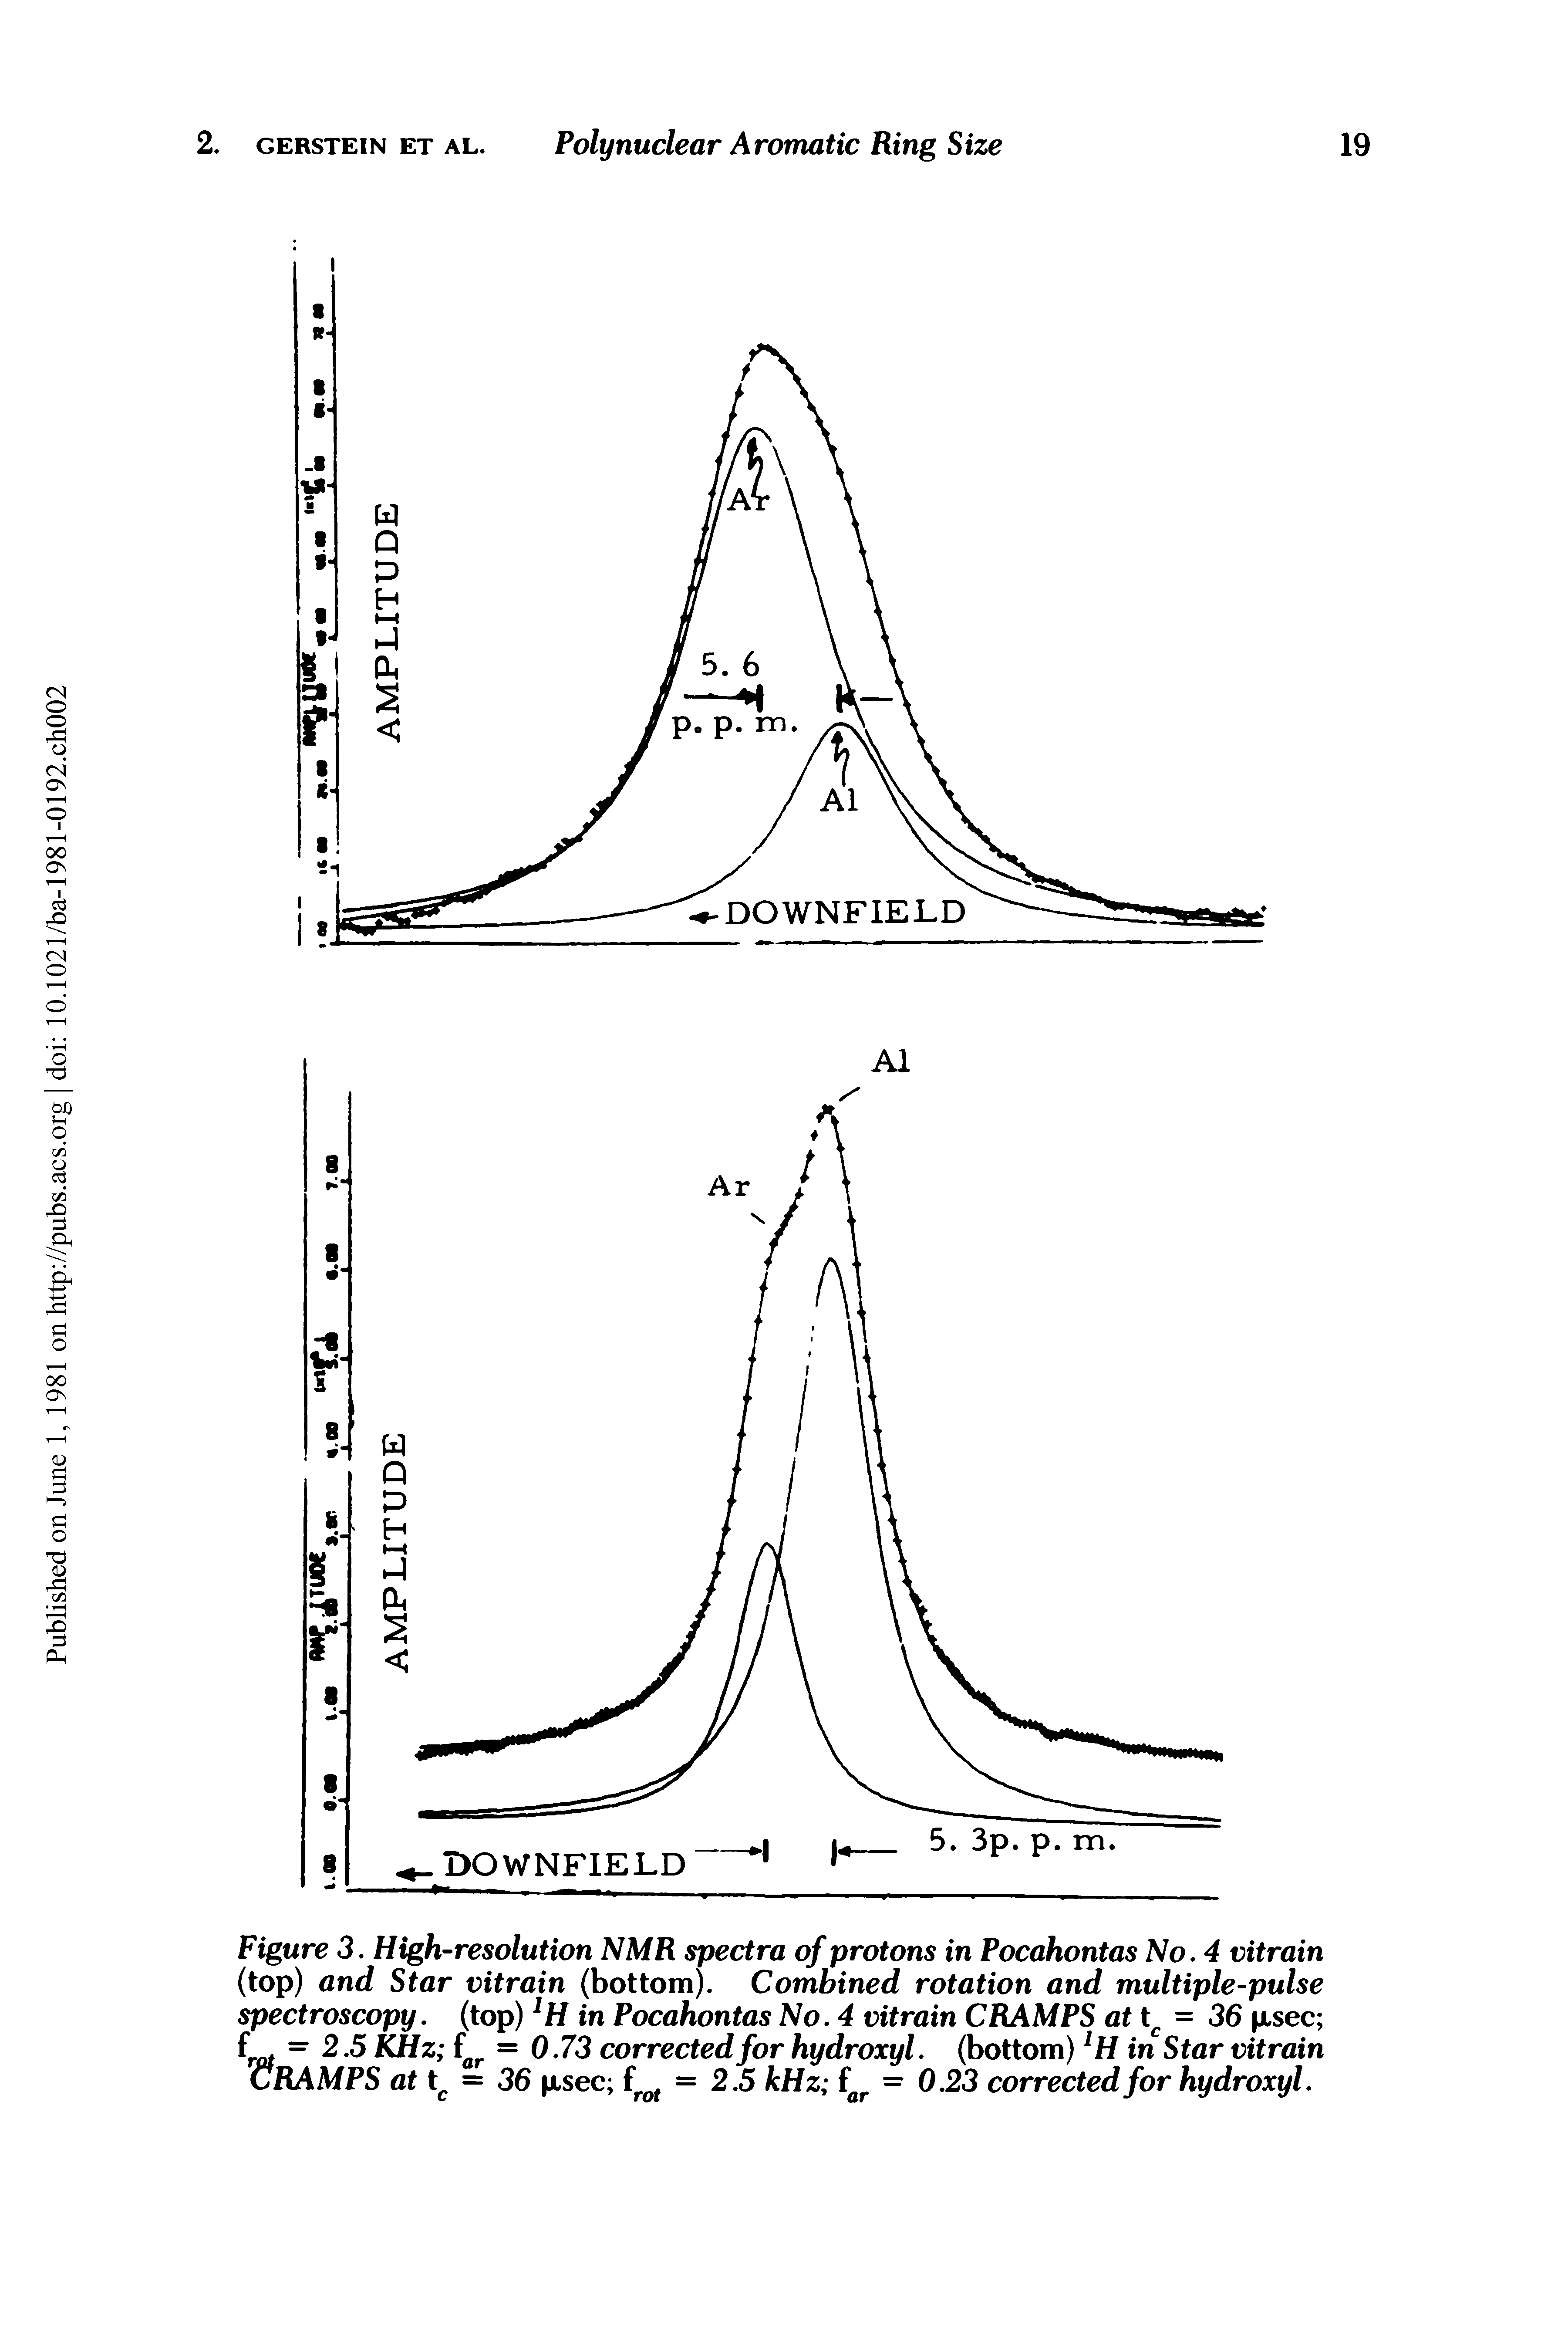 Figure 3, High-resolution NMR spectra of protons in Pocahontas No, 4 vitrain (top) and Star vitrain (bottom). Combined rotation and multiple-pulse spectroscopy, (top) in Pocahontas No. 4 vitrain CRAMPS at t = 36 jjisec f = 2.5 KHz = 0.73 corrected for hydroxyl, (bottom) H in Star vitrain CRAMPS at t = 36 xsec f =2.5 kHz f = 0.23 corrected for hydroxyl.